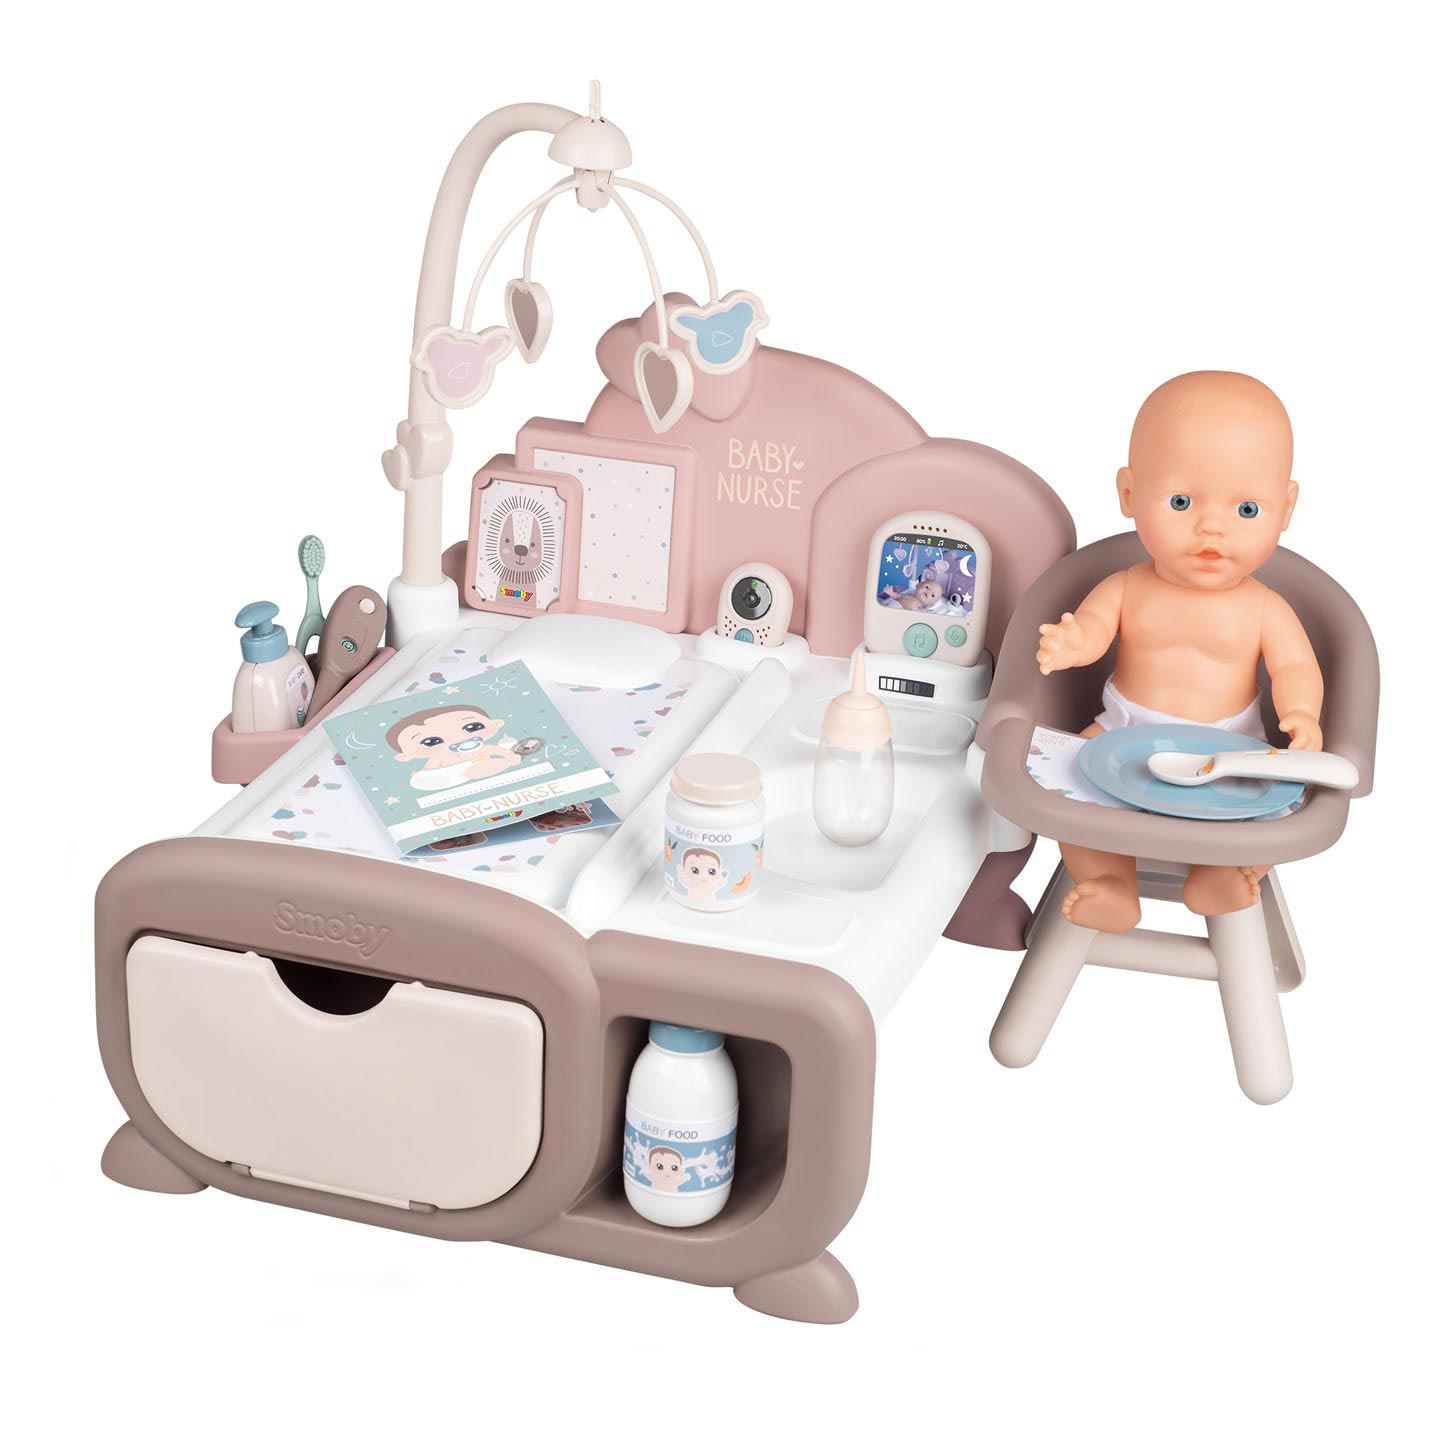 Smoby Baby Nurse Changing Table with Accessories, 20 pcs